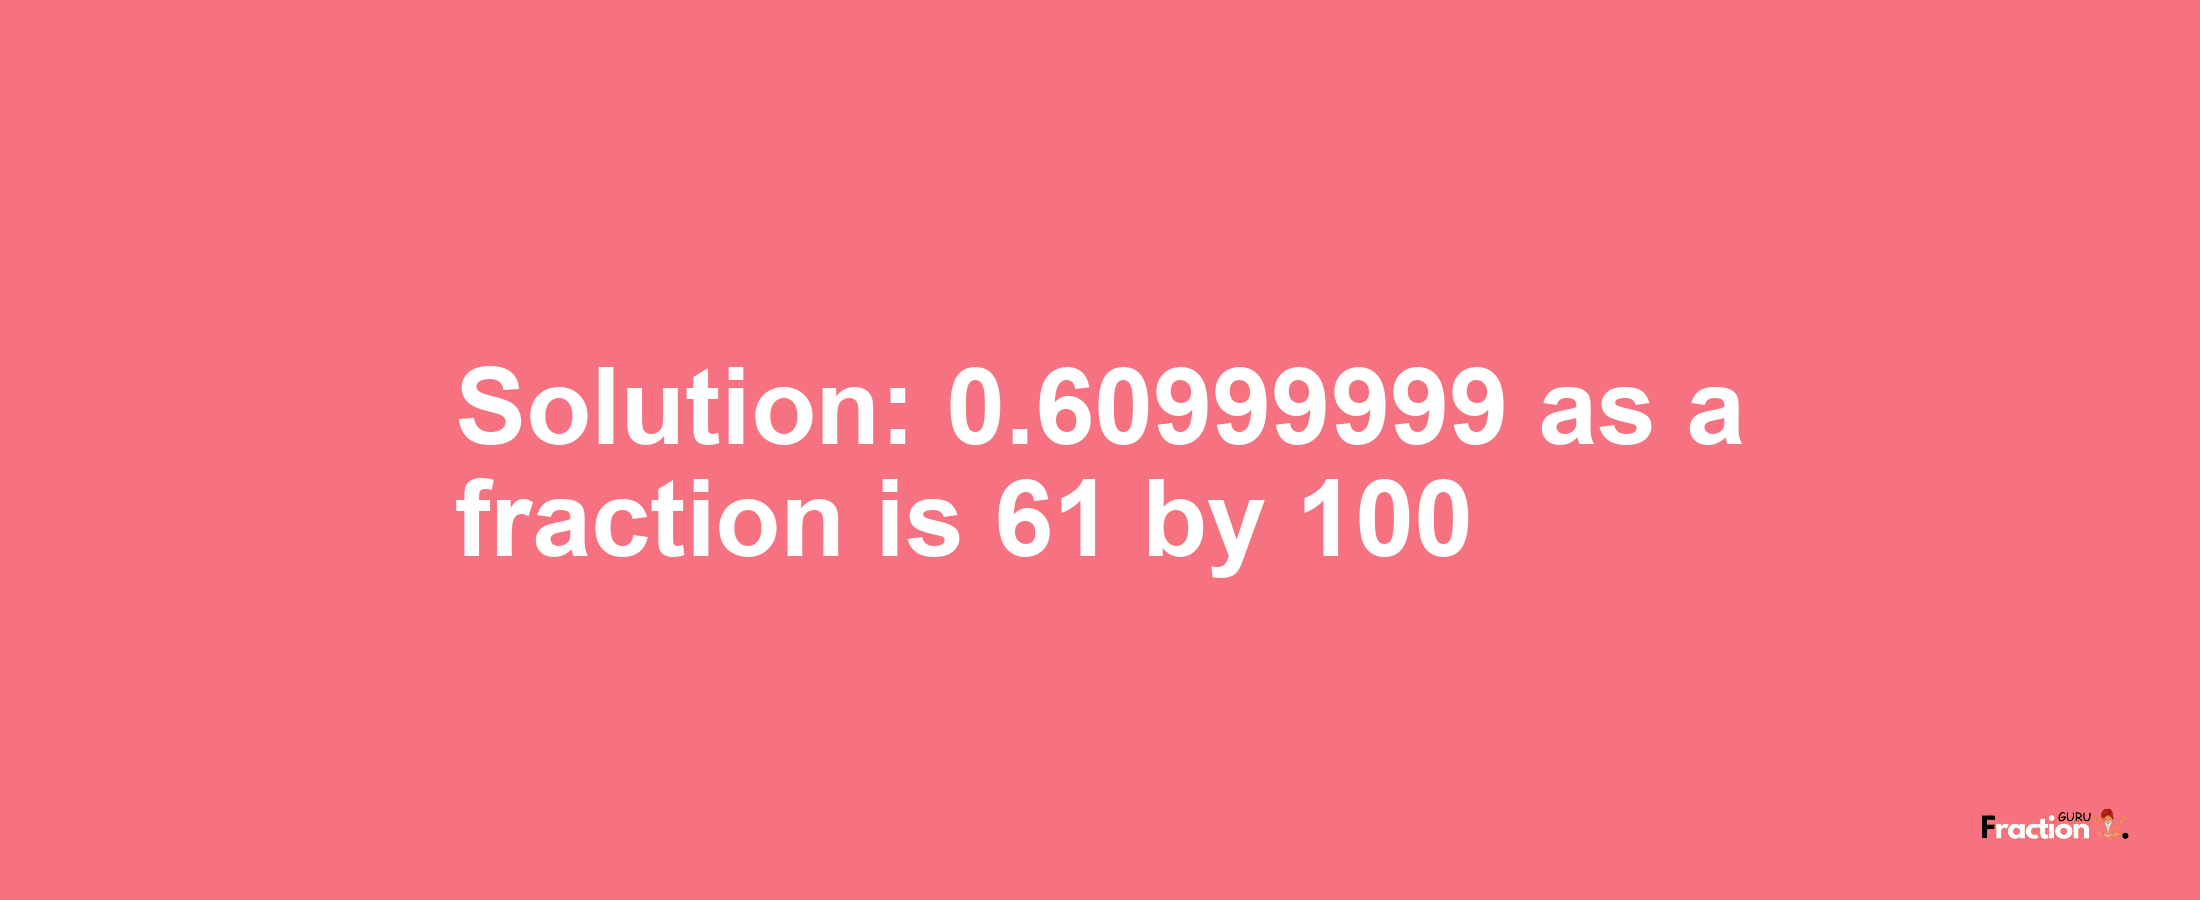 Solution:0.60999999 as a fraction is 61/100